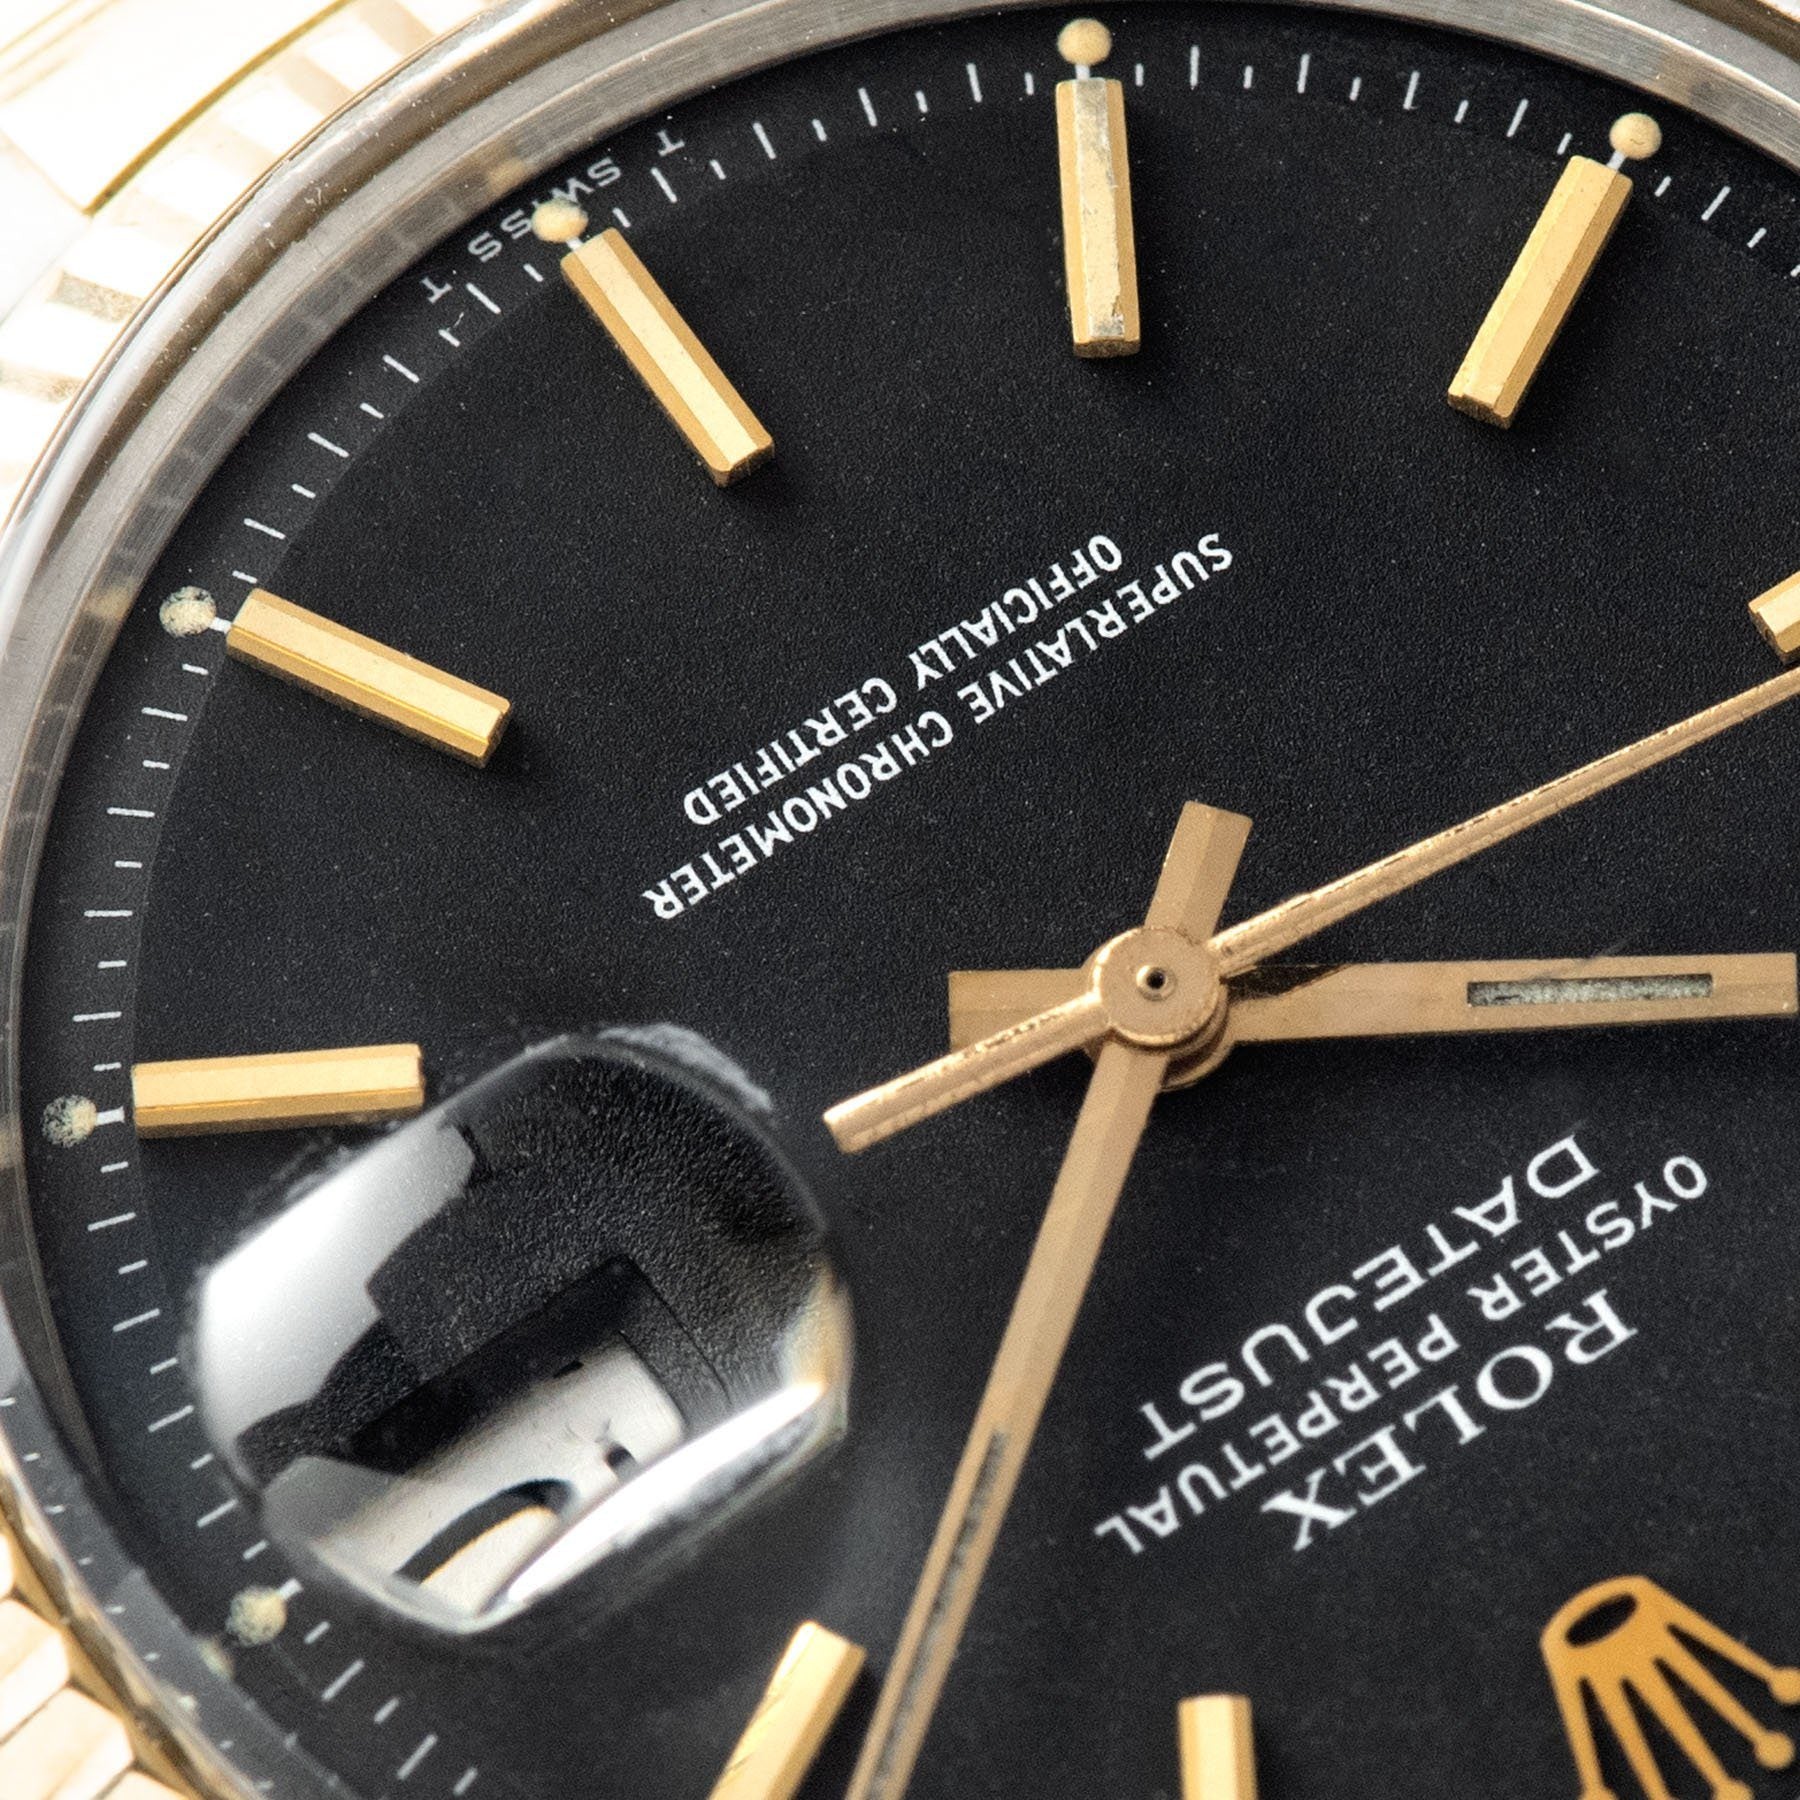 Rolex Datejust Steel and Gold 1601 Black Dial Box and Papers